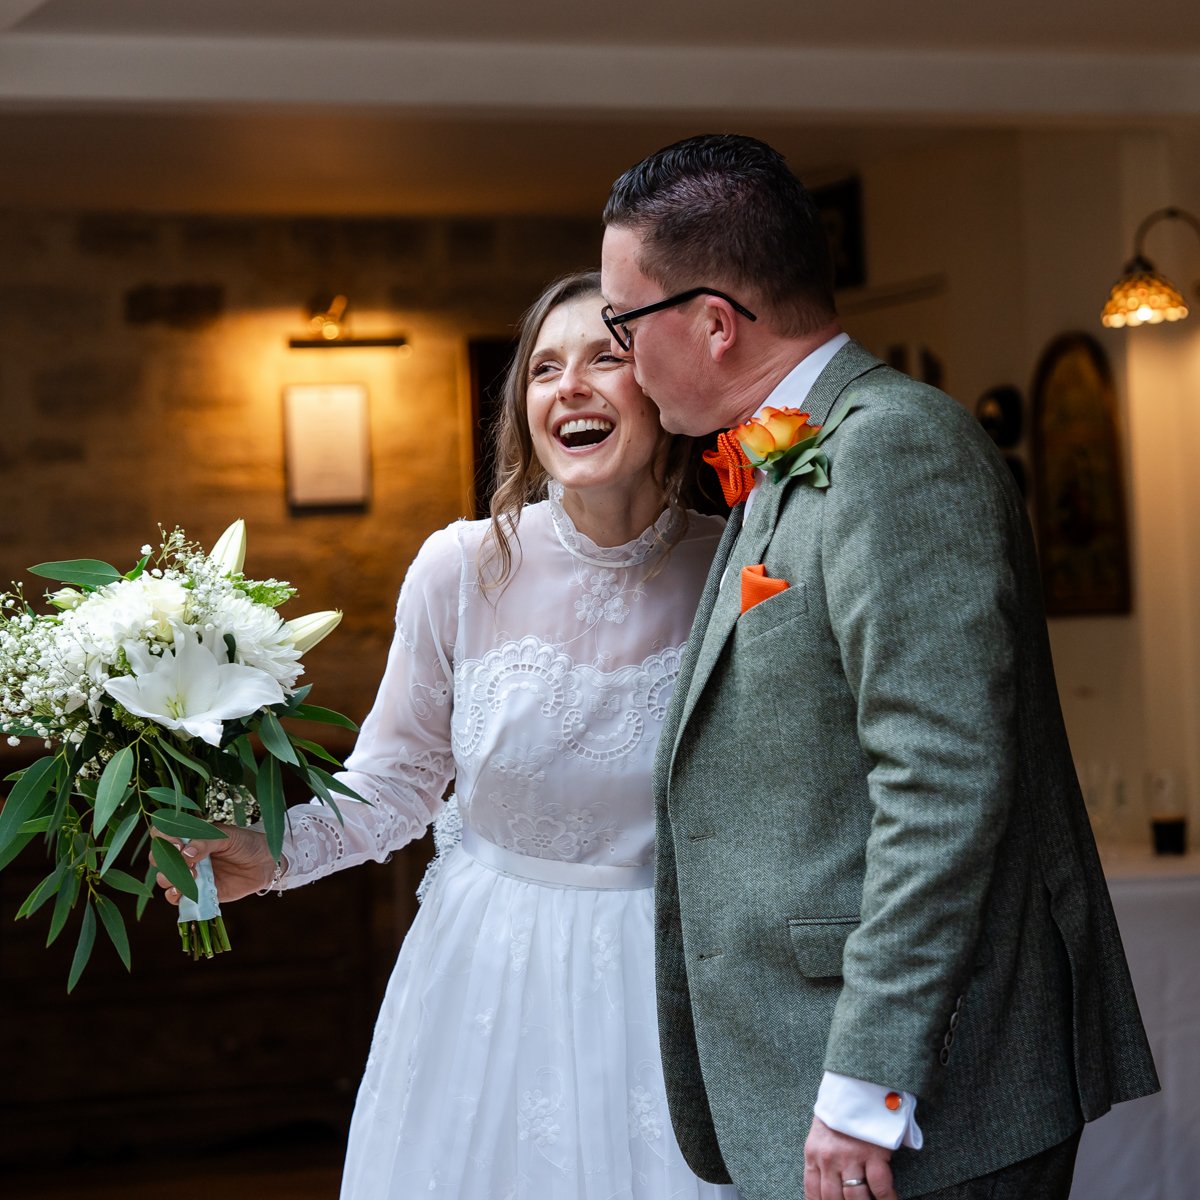 This was a first for me - a Bride wearing her Mum's wedding dress! How amazing does Cerys look?! 

Cerys and Andy's wedding was such a wonderful family-filled day. There was even a &quot;Nostalgia Corner&quot; displaying photographs of family wedding